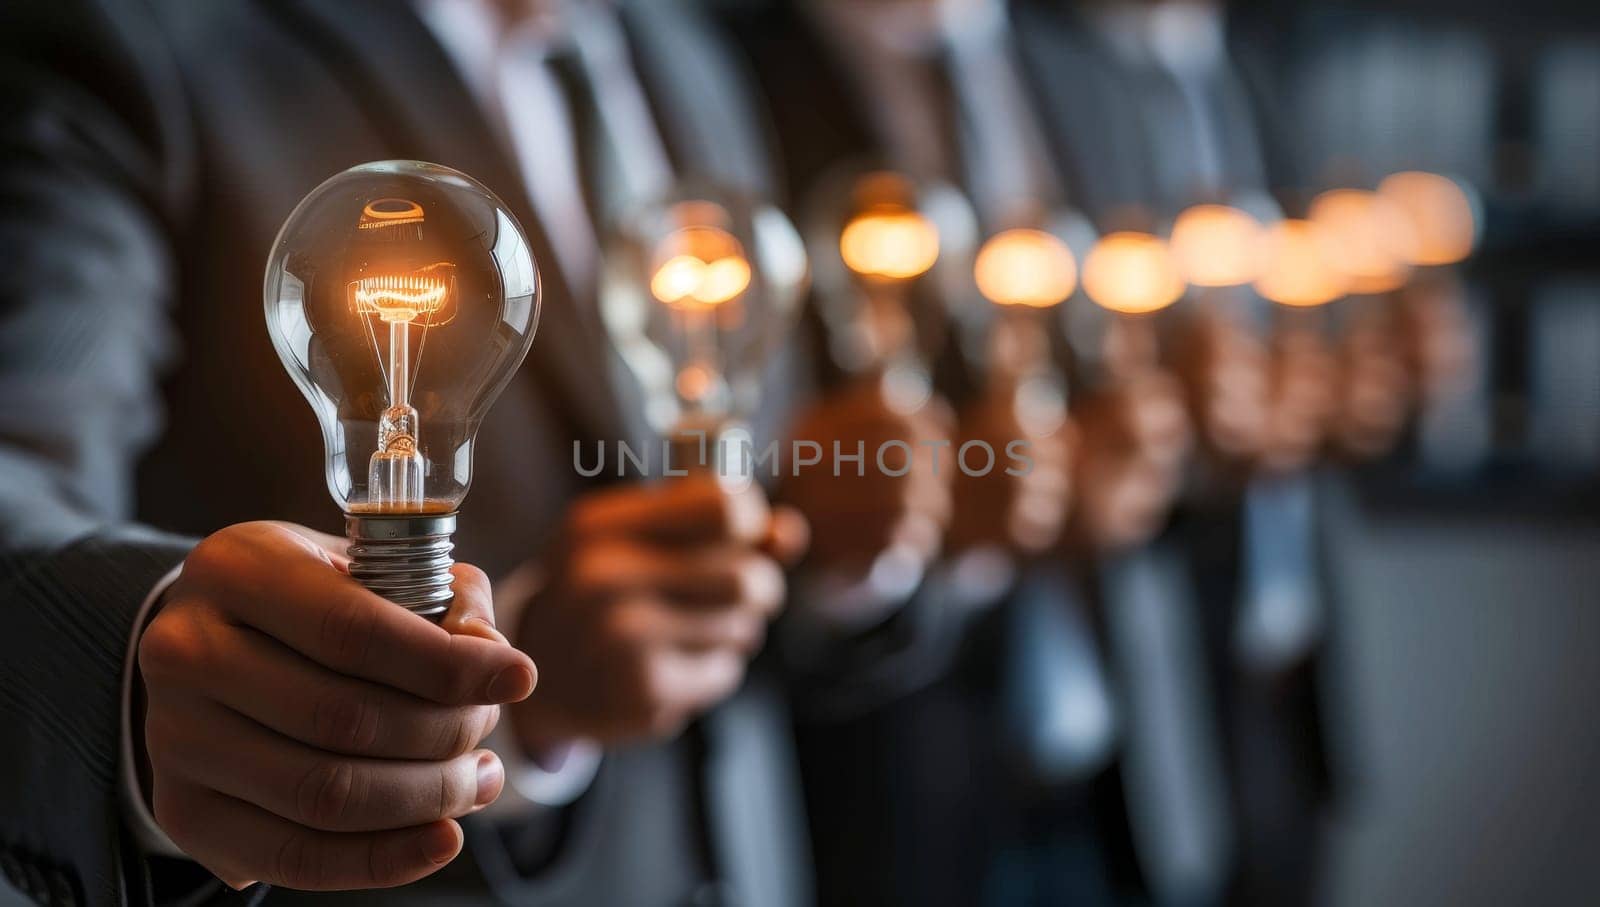 Group of business people holding light bulb in their hands. Business and innovation concept.